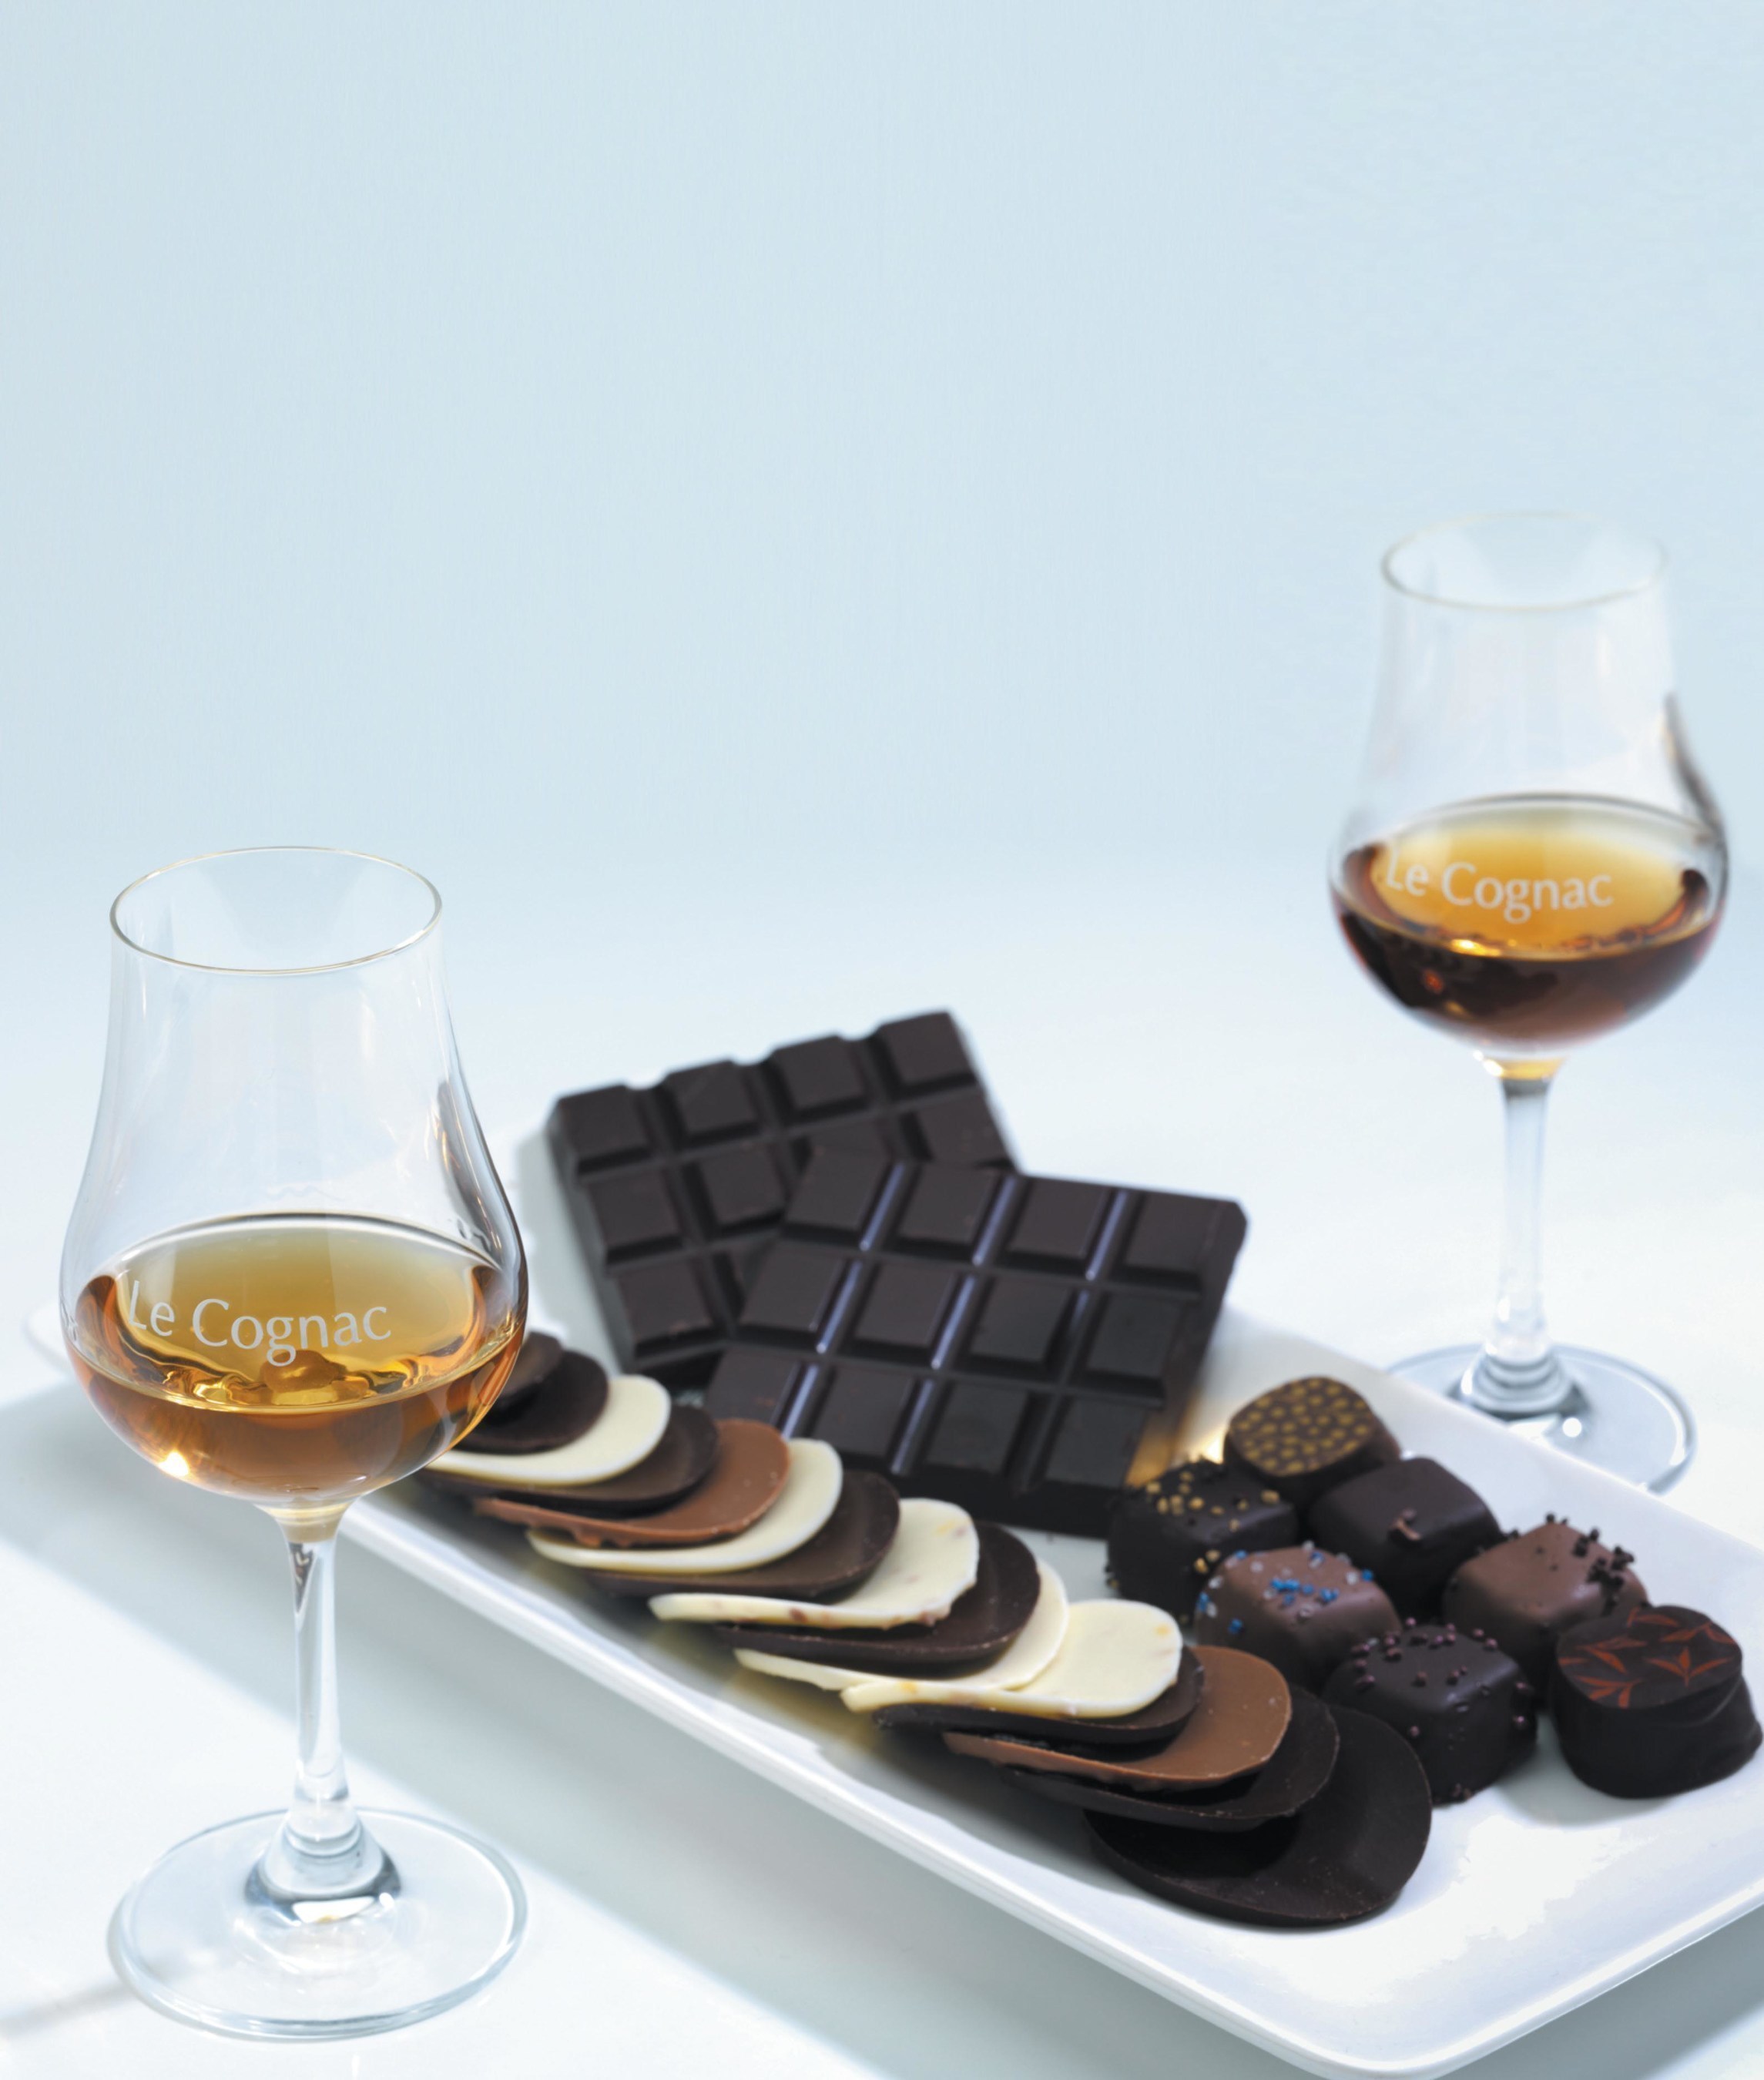 Chocolate-Cognac pairing, a happy union of textures and aromas for Valentine's Day (PRNewsFoto/The Cognac Board (BNIC))